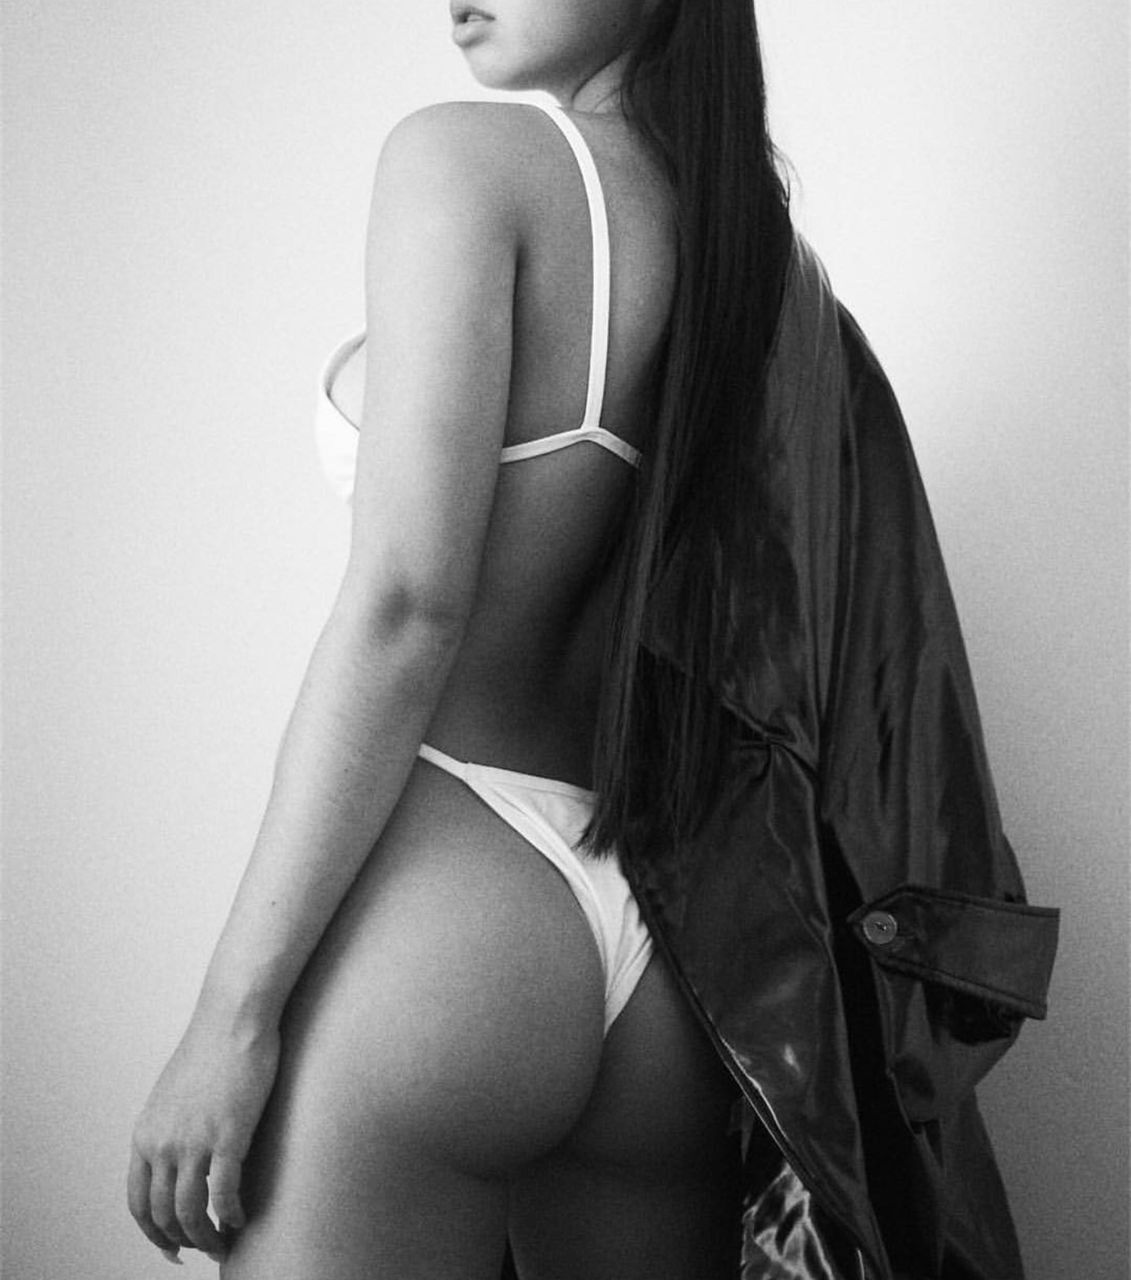 one person, adult, women, black and white, young adult, clothing, underwear, hairstyle, lingerie, fashion, indoors, monochrome photography, black, long hair, studio shot, photo shoot, portrait, monochrome, bra, desire, black hair, glamour, undergarment, female, three quarter length, slim, lifestyles, blond hair, panties, semi-dress, side view, human hair, standing, g-string, person